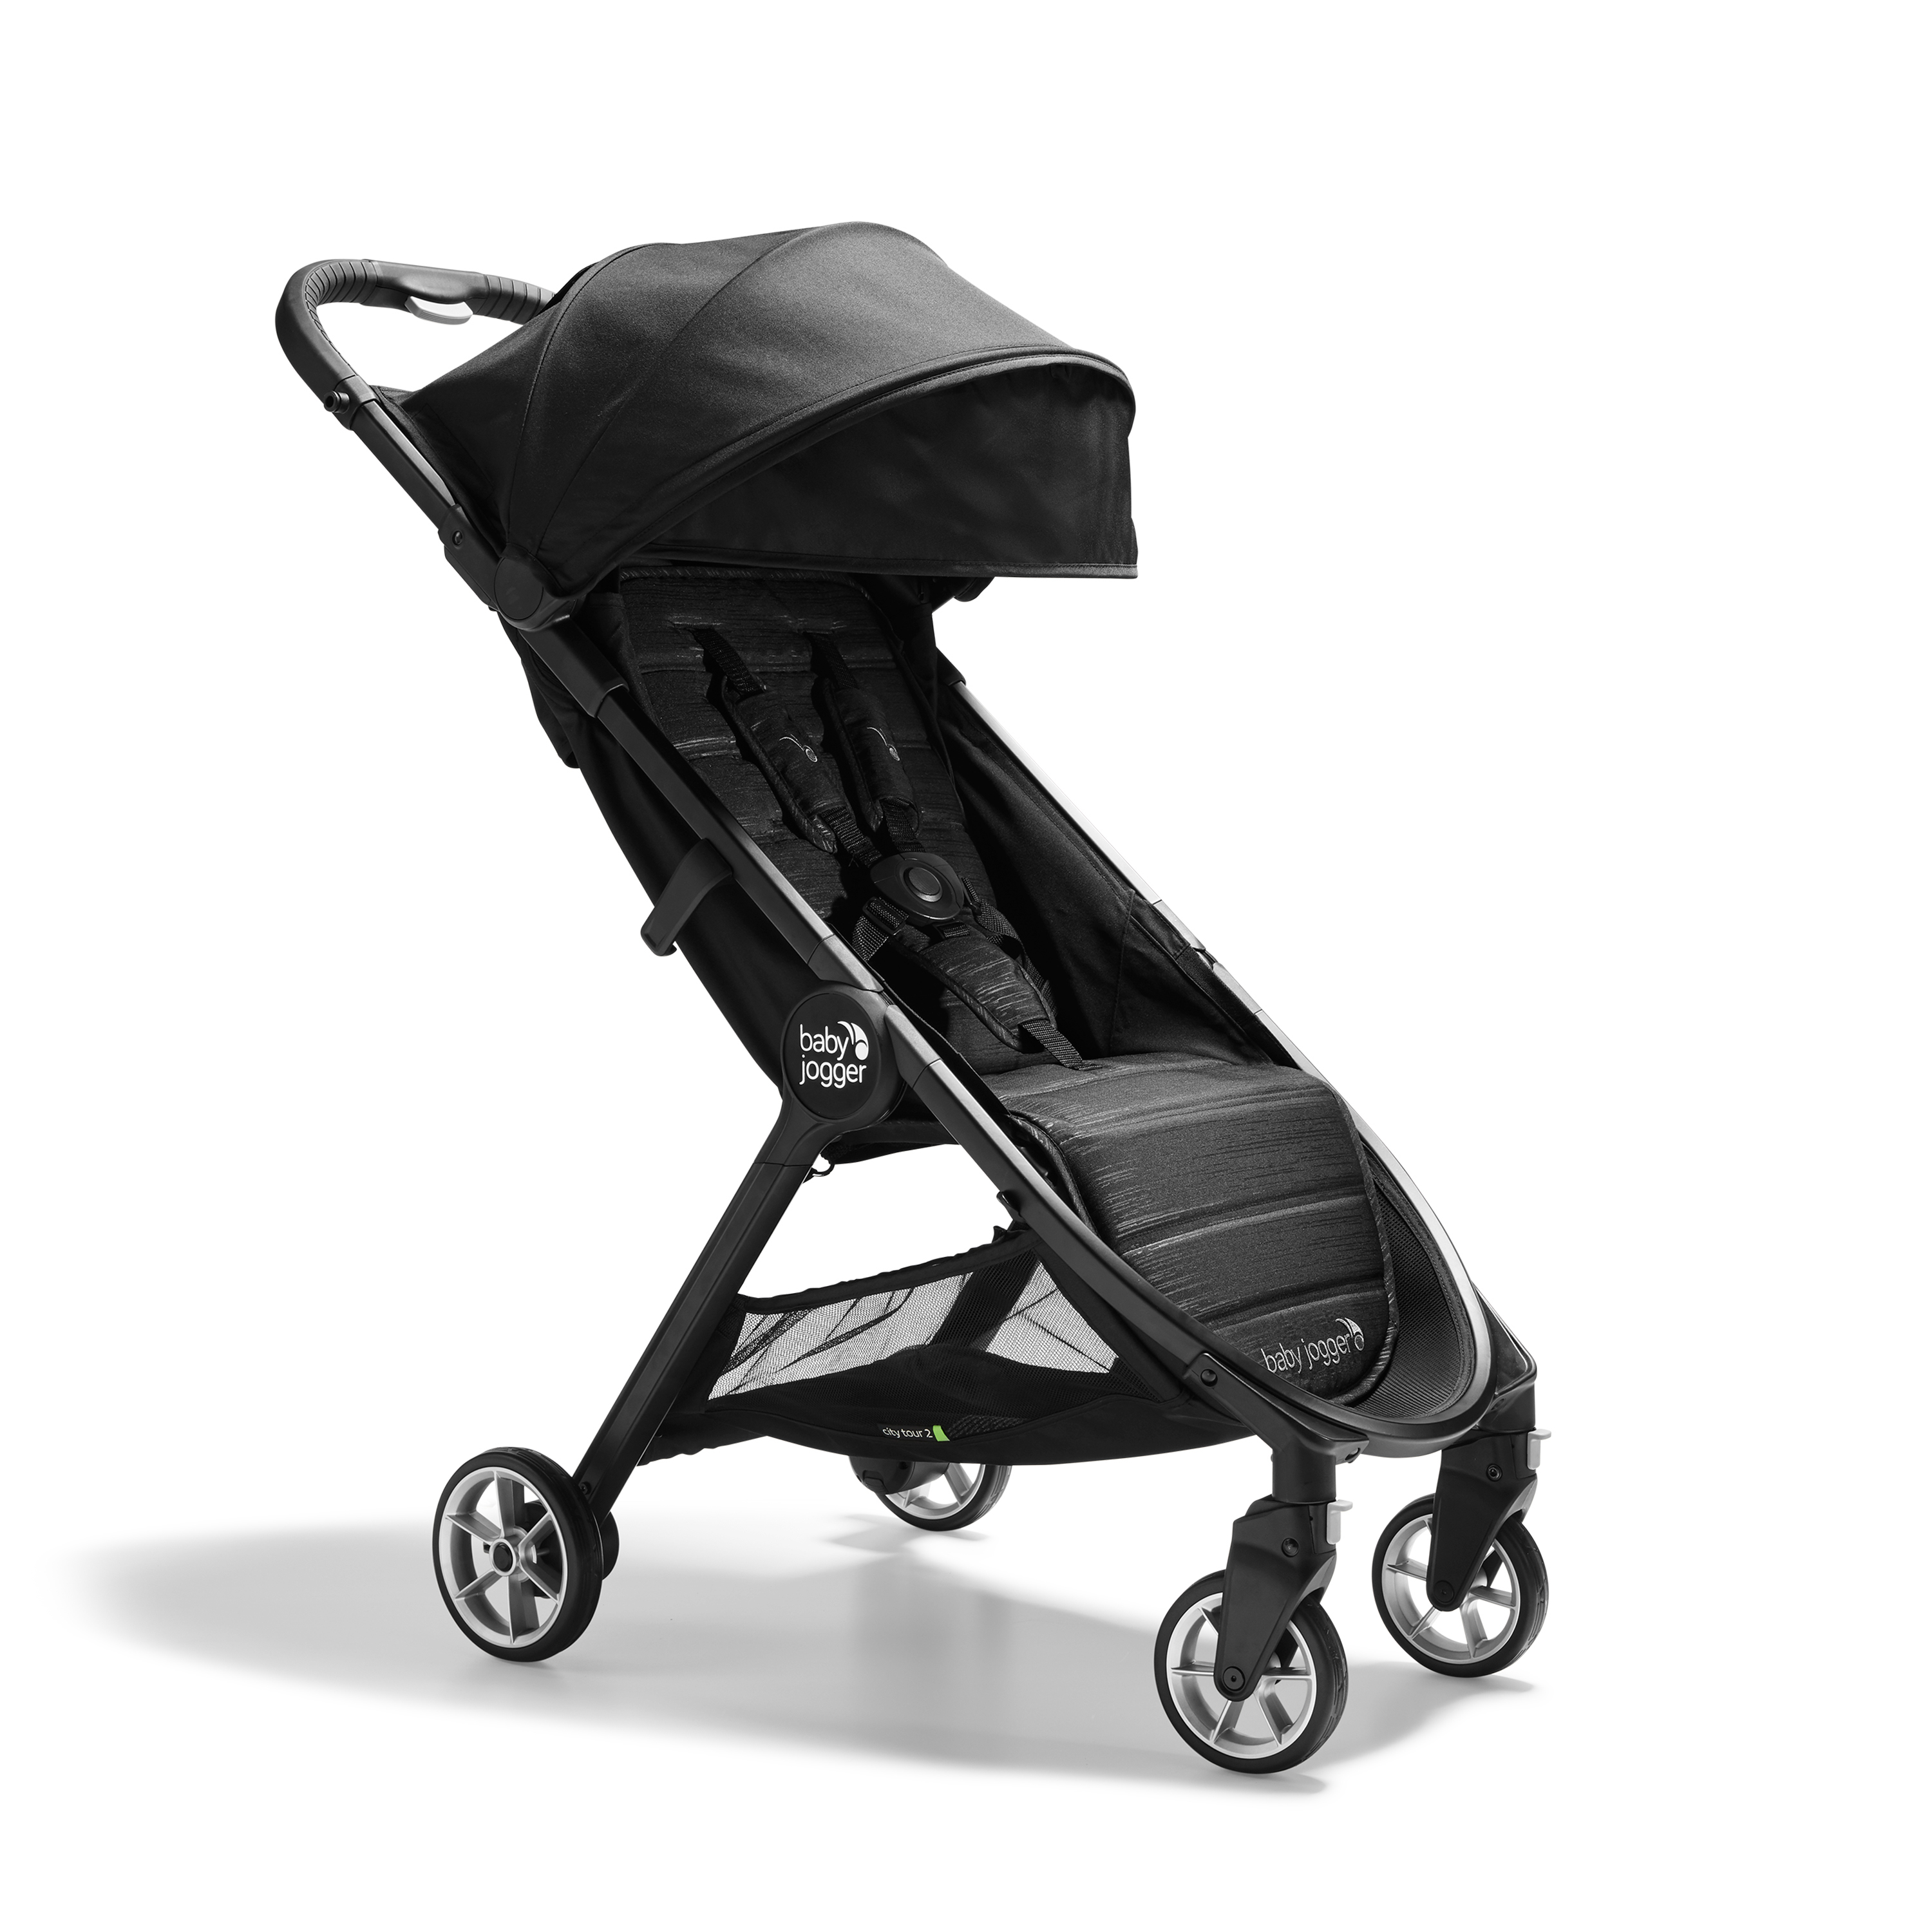 Baby Jogger® City Tour ™ 2 Stroller, Jet, 14.3 lbs - image 1 of 7